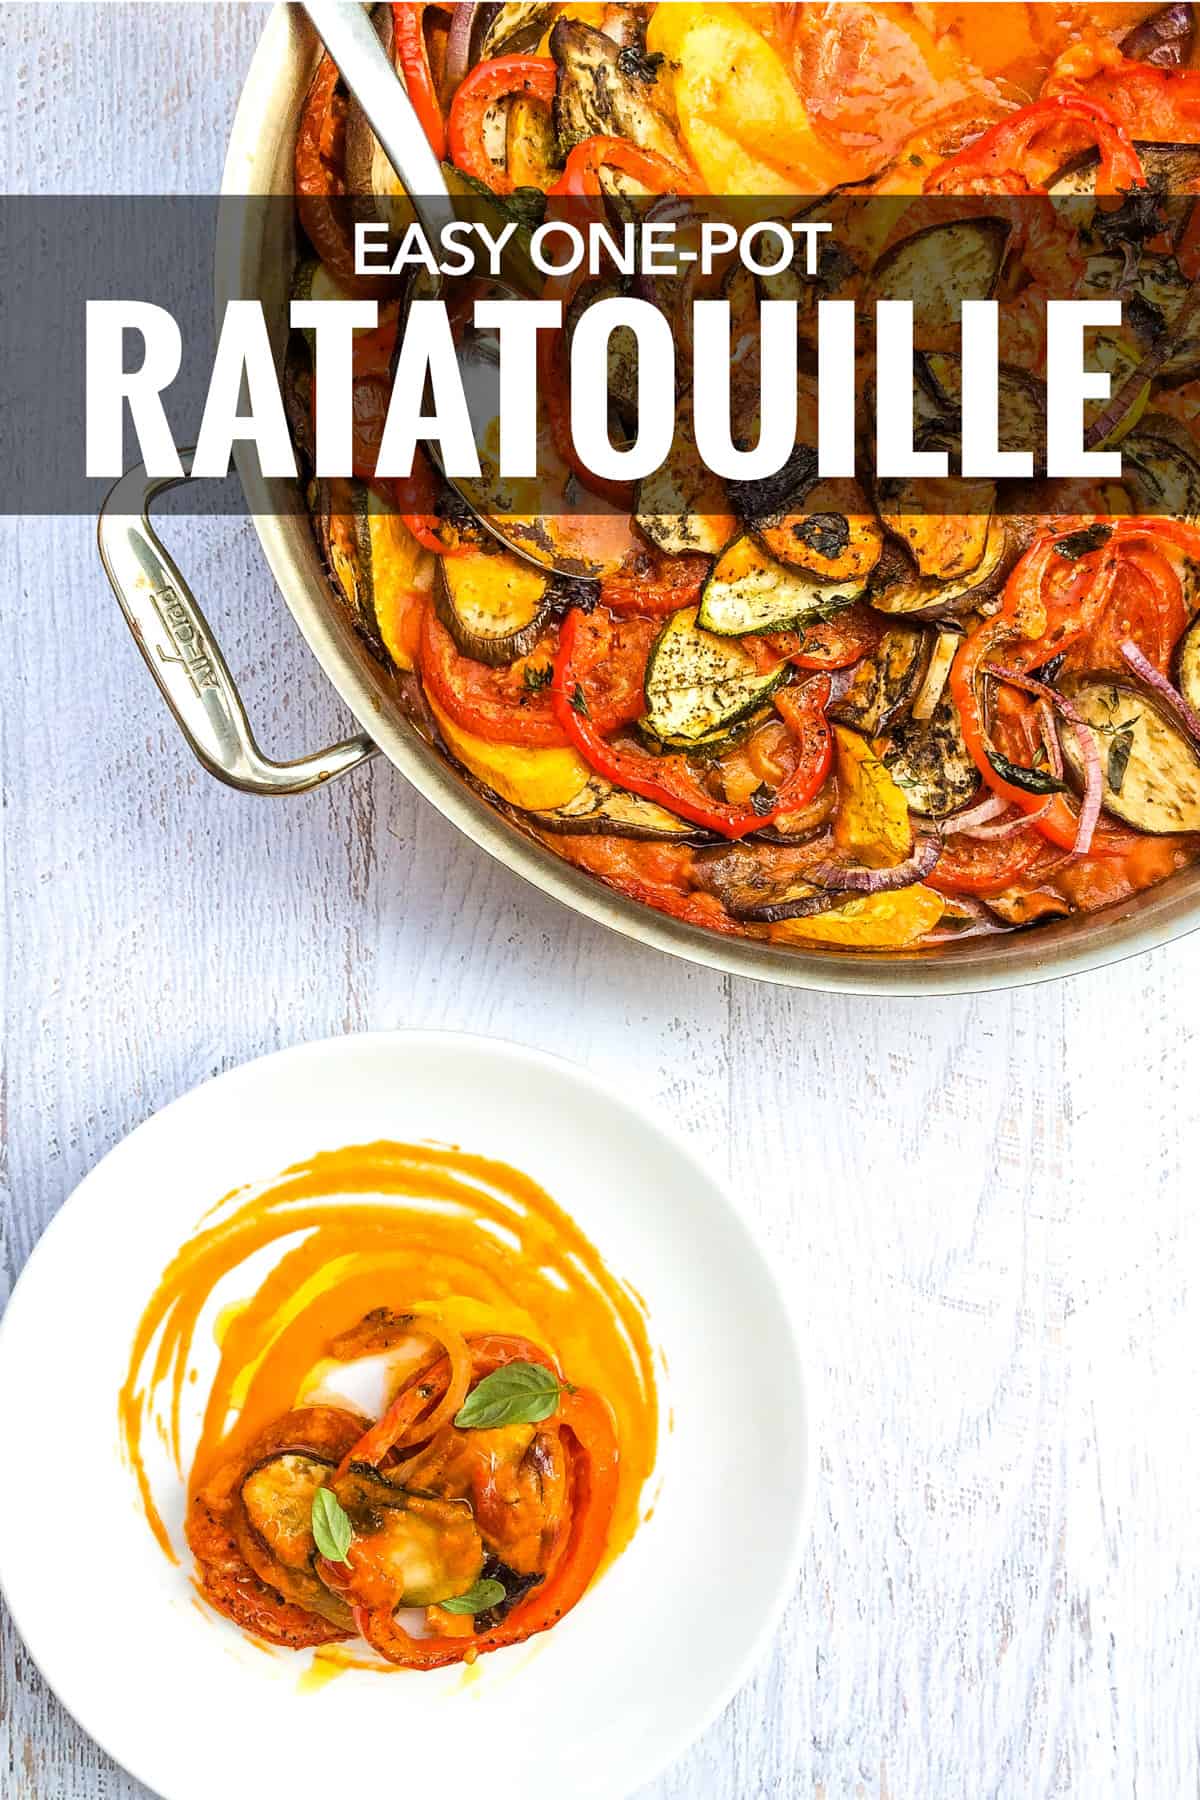 So so easy to make! >> A classic French dish, this easy ratatouille recipe is perfect with summer vegetables but also comforting in winter.